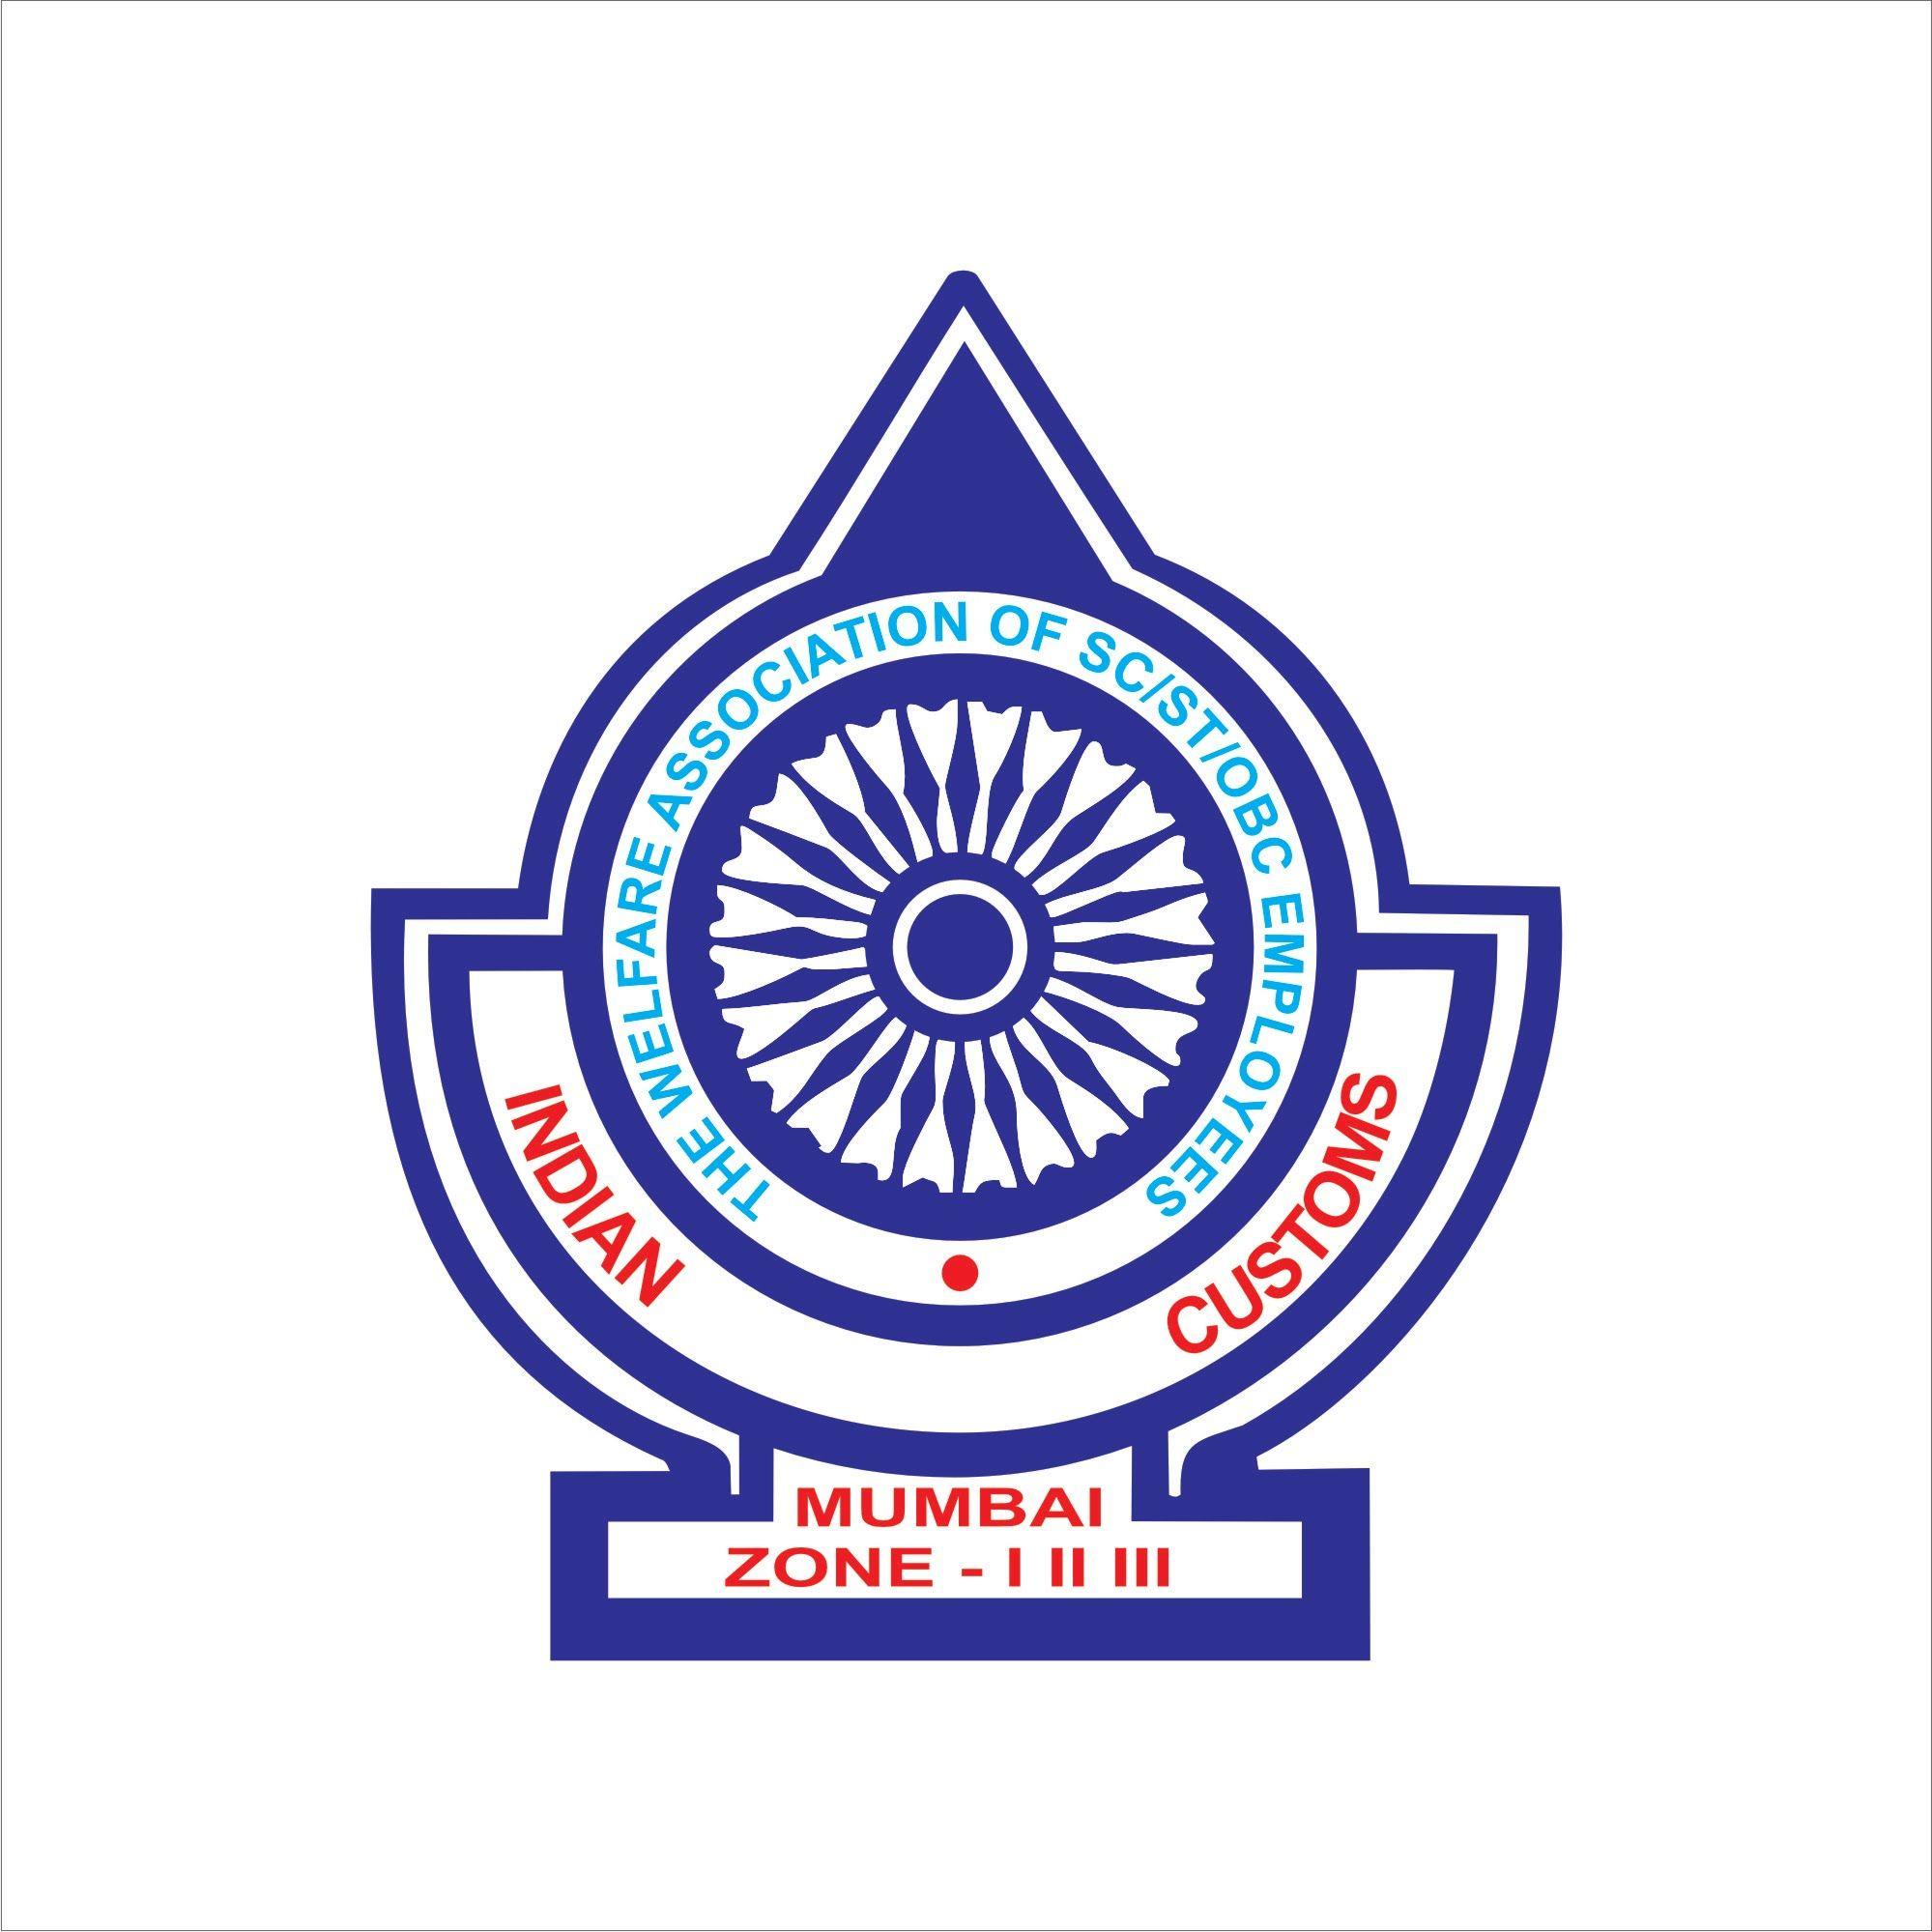 Scst Logo - Resources - The Welfare Association of SC/ST/OBC Employees of Indian ...